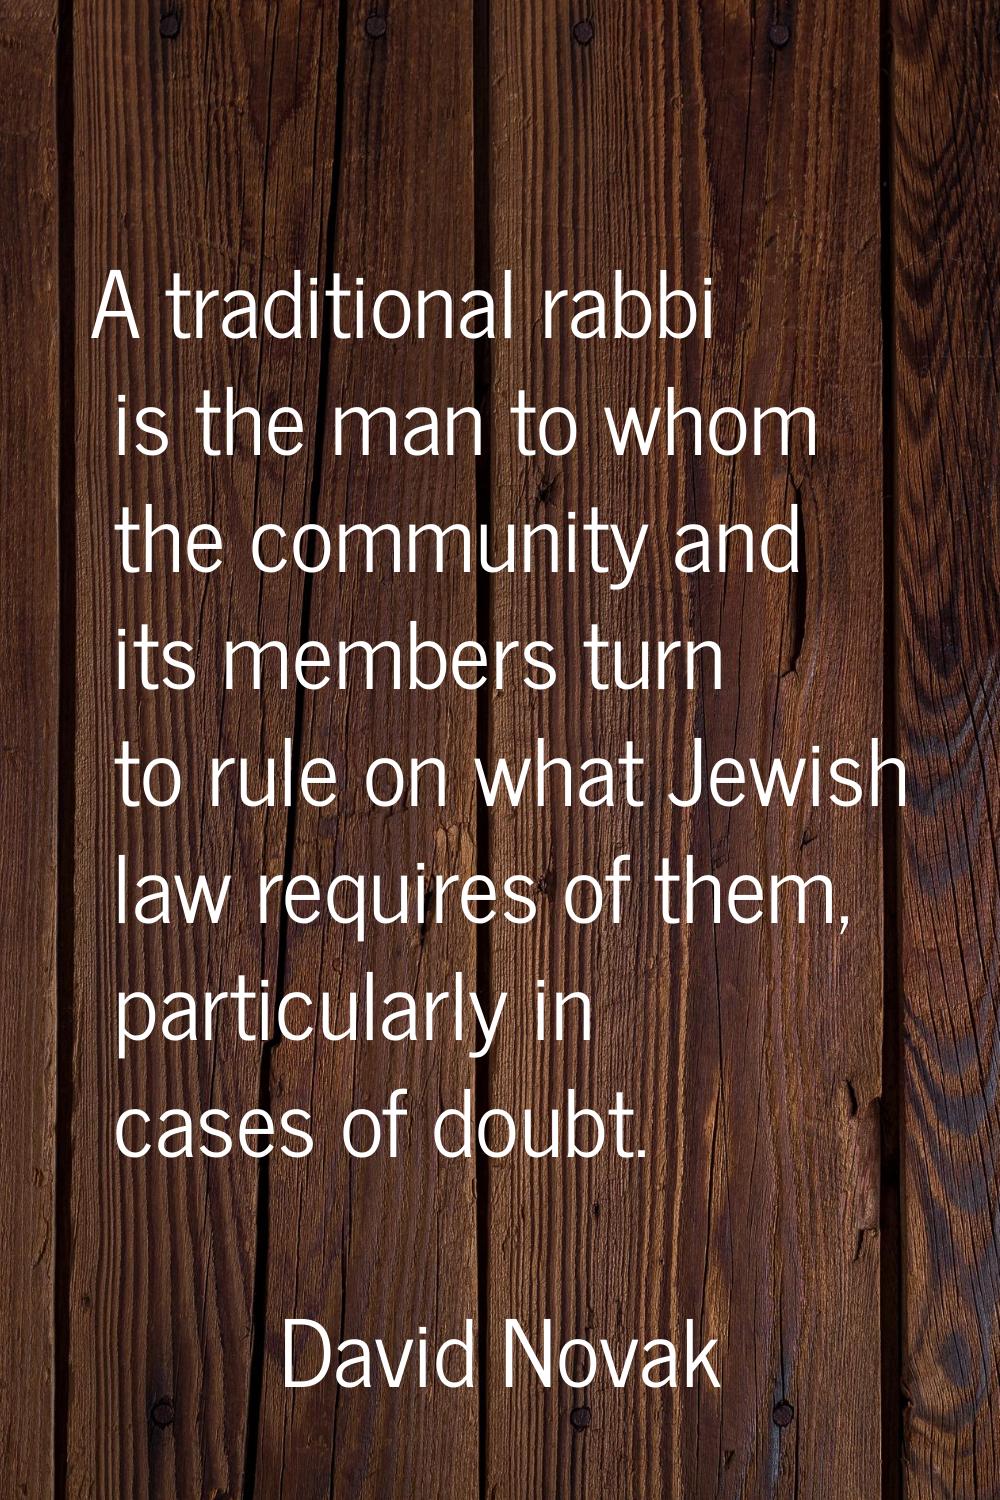 A traditional rabbi is the man to whom the community and its members turn to rule on what Jewish la